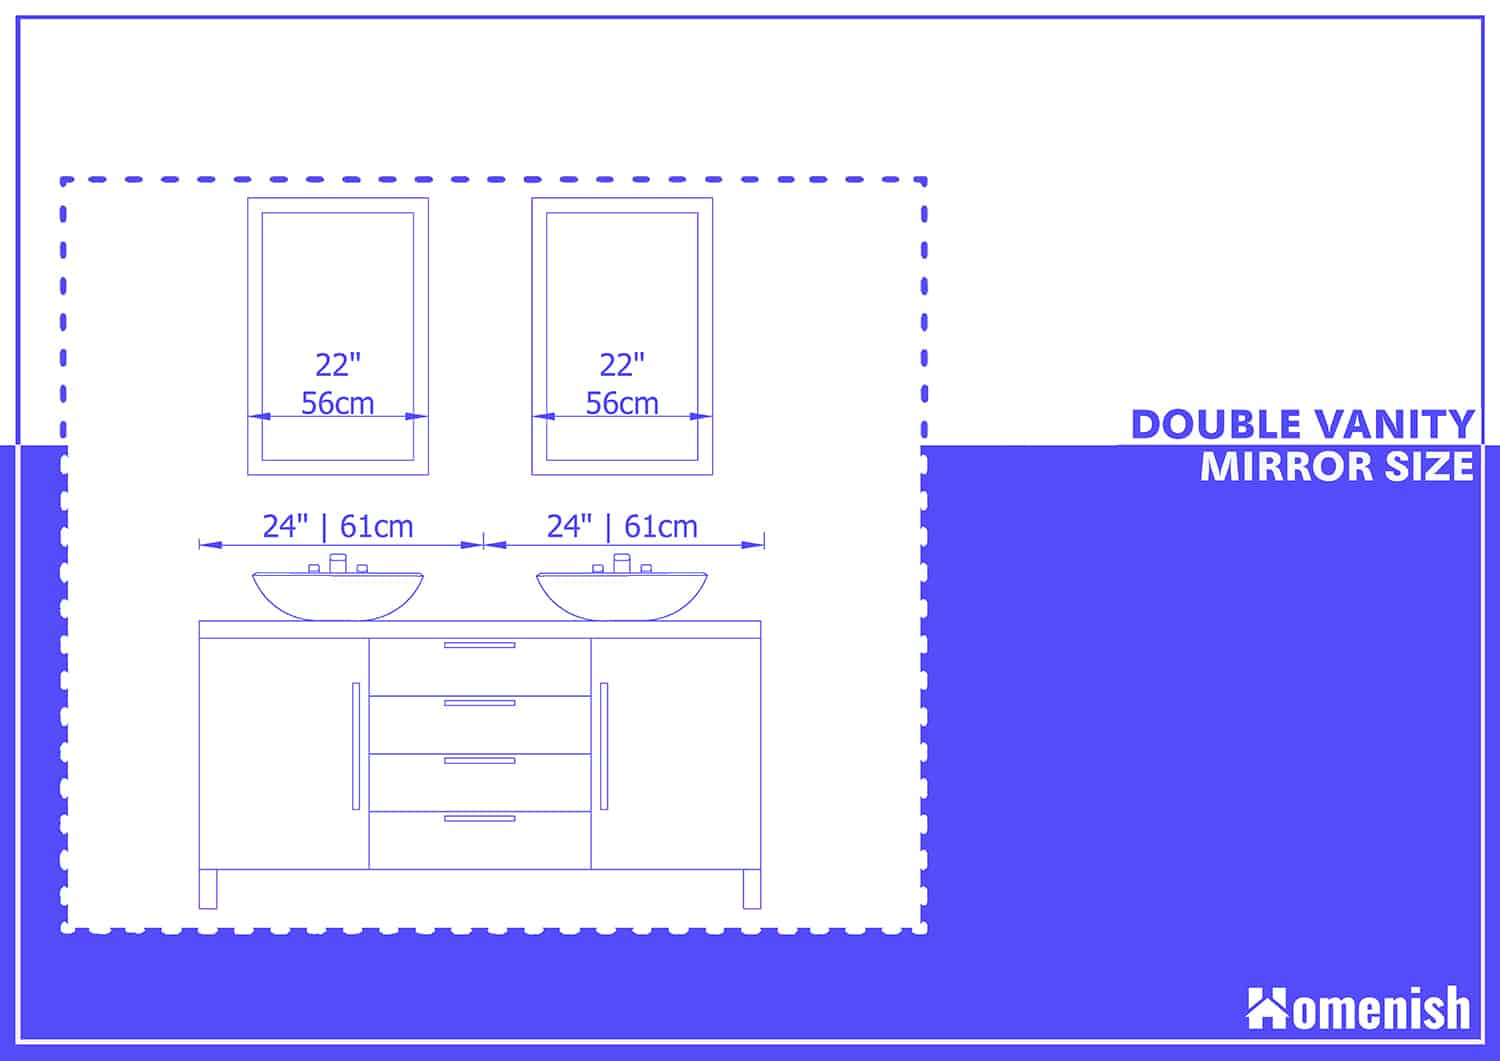 Double Vanity Mirror Size, What Are The Standard Vanity Sizes